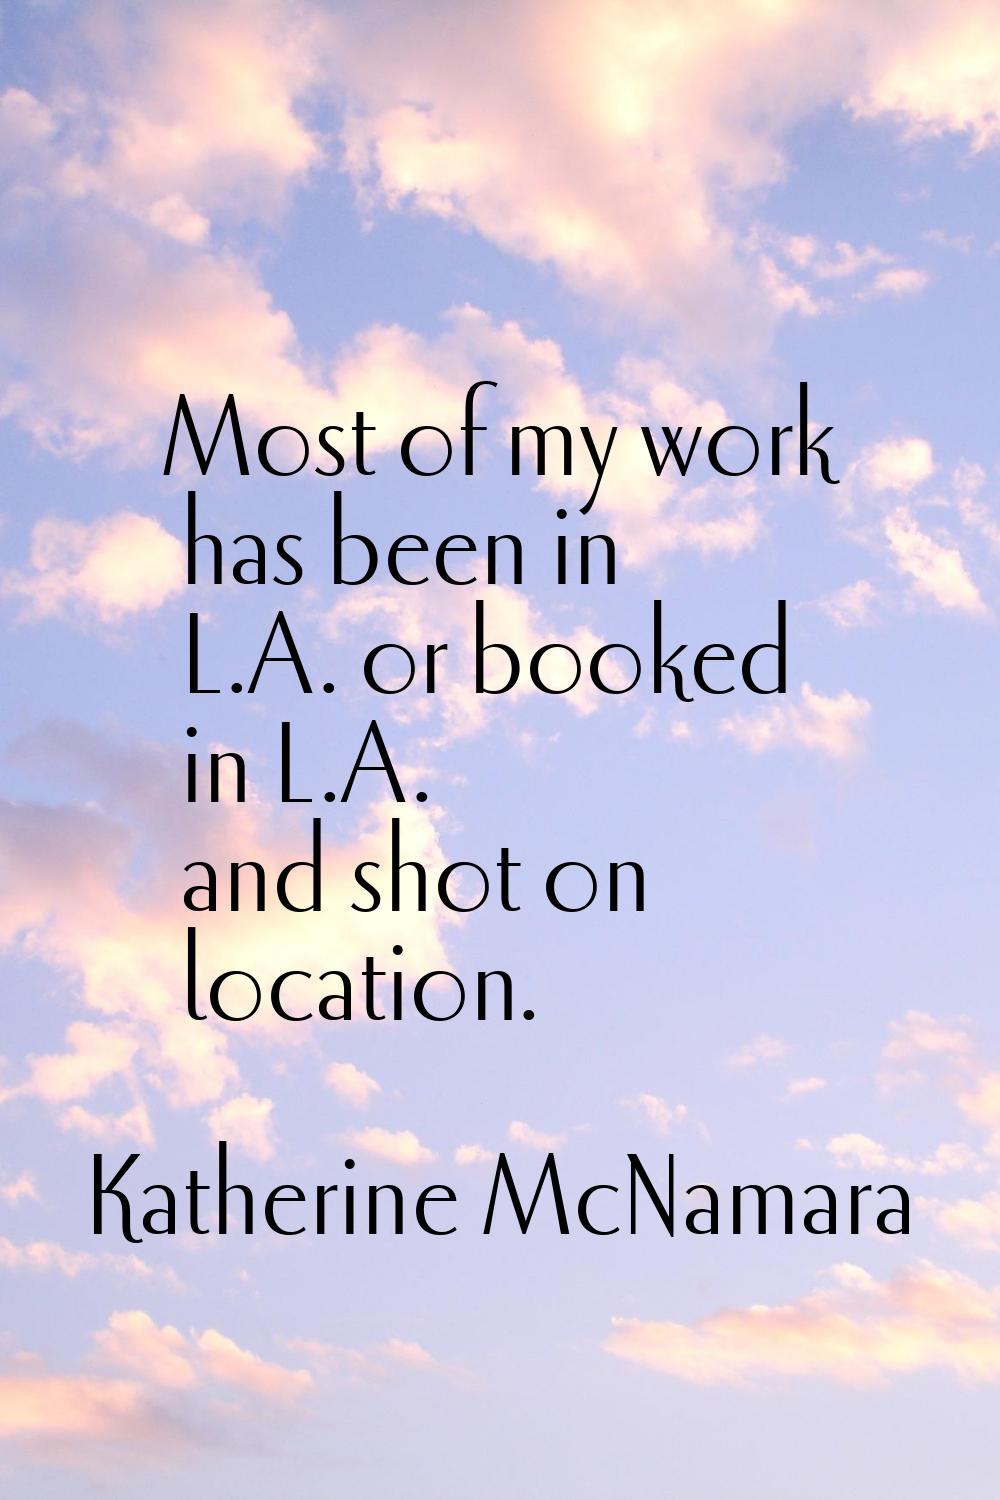 Most of my work has been in L.A. or booked in L.A. and shot on location.